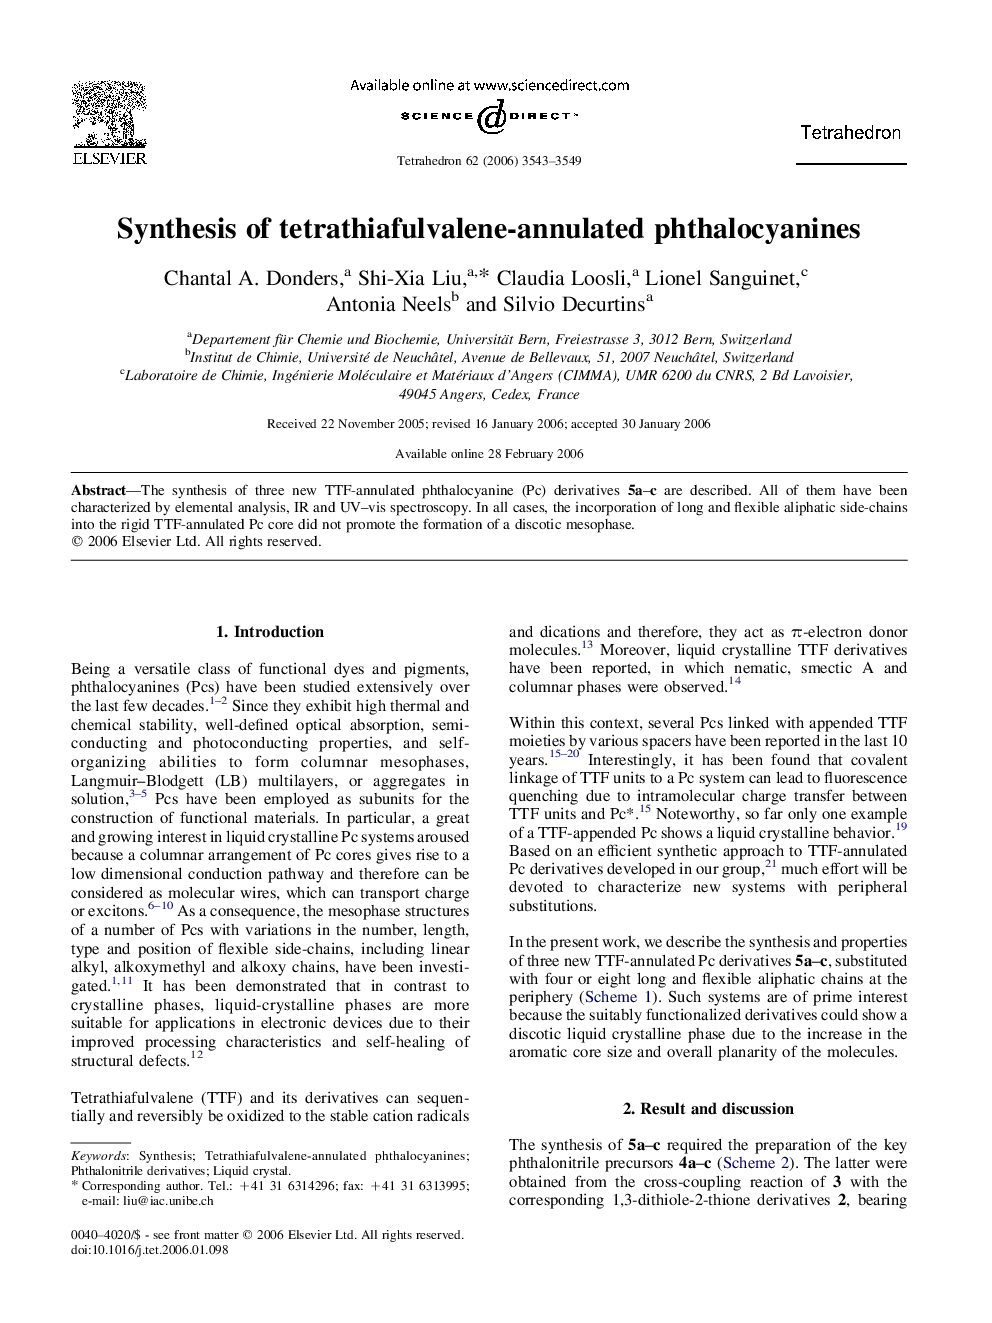 Synthesis of tetrathiafulvalene-annulated phthalocyanines